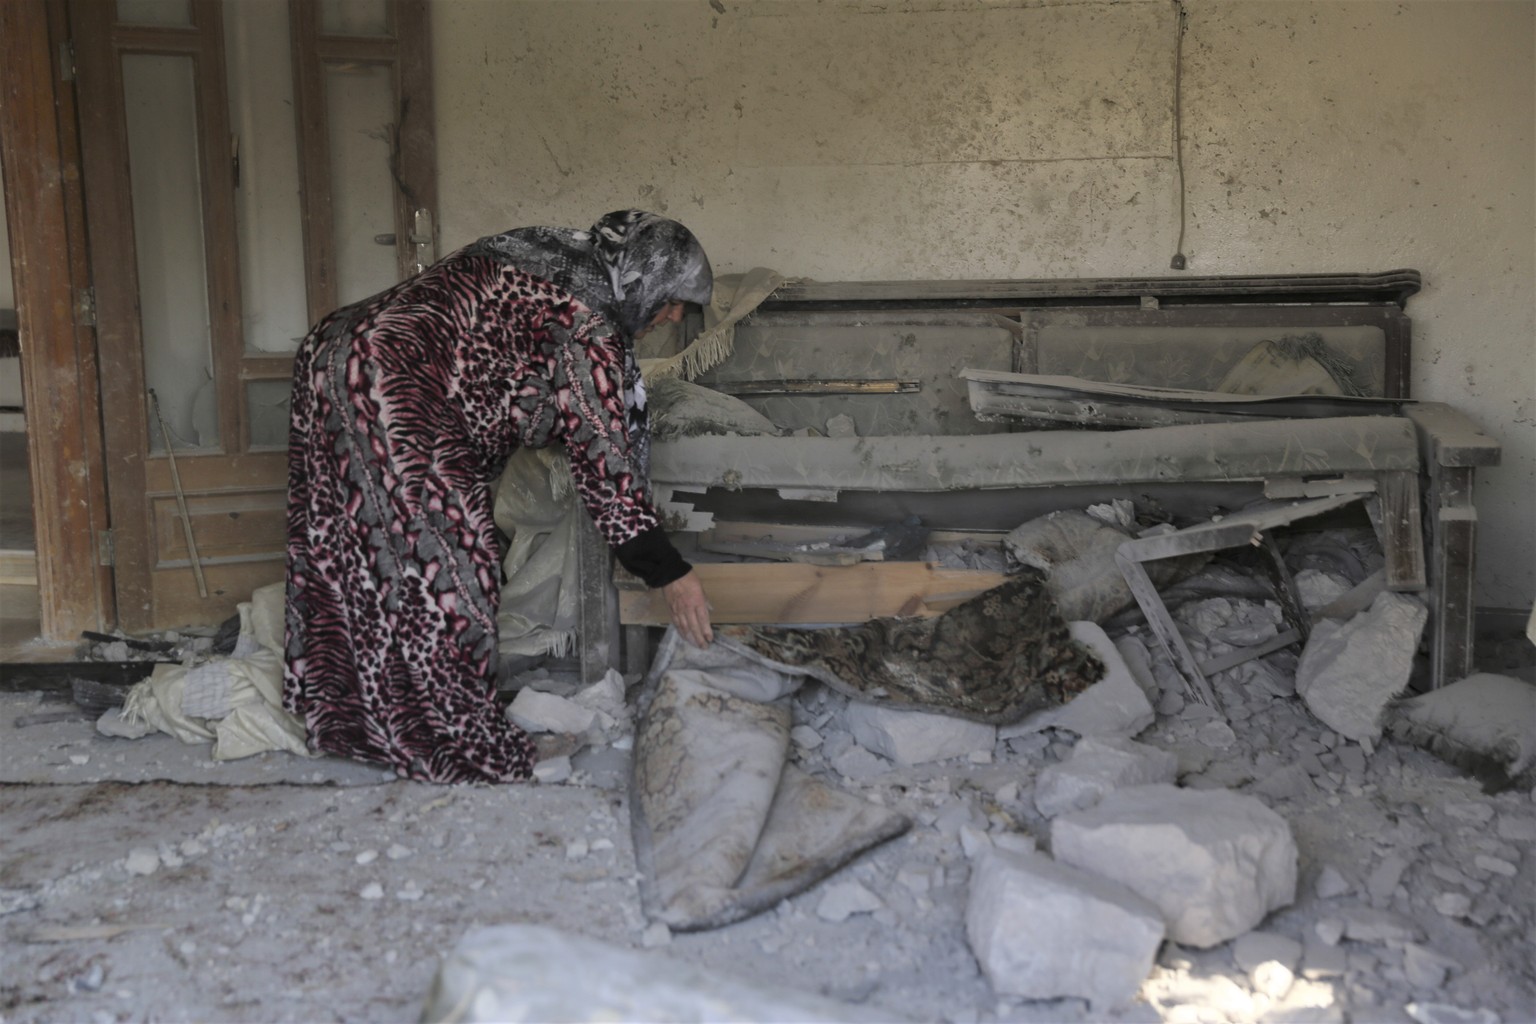 A woman checks damage to her home in the village of Barisha, in Idlib province, Syria, Sunday, Oct. 27, 2019, after an operation by the U.S. military which targeted Abu Bakr al-Baghdadi, the shadowy l ...